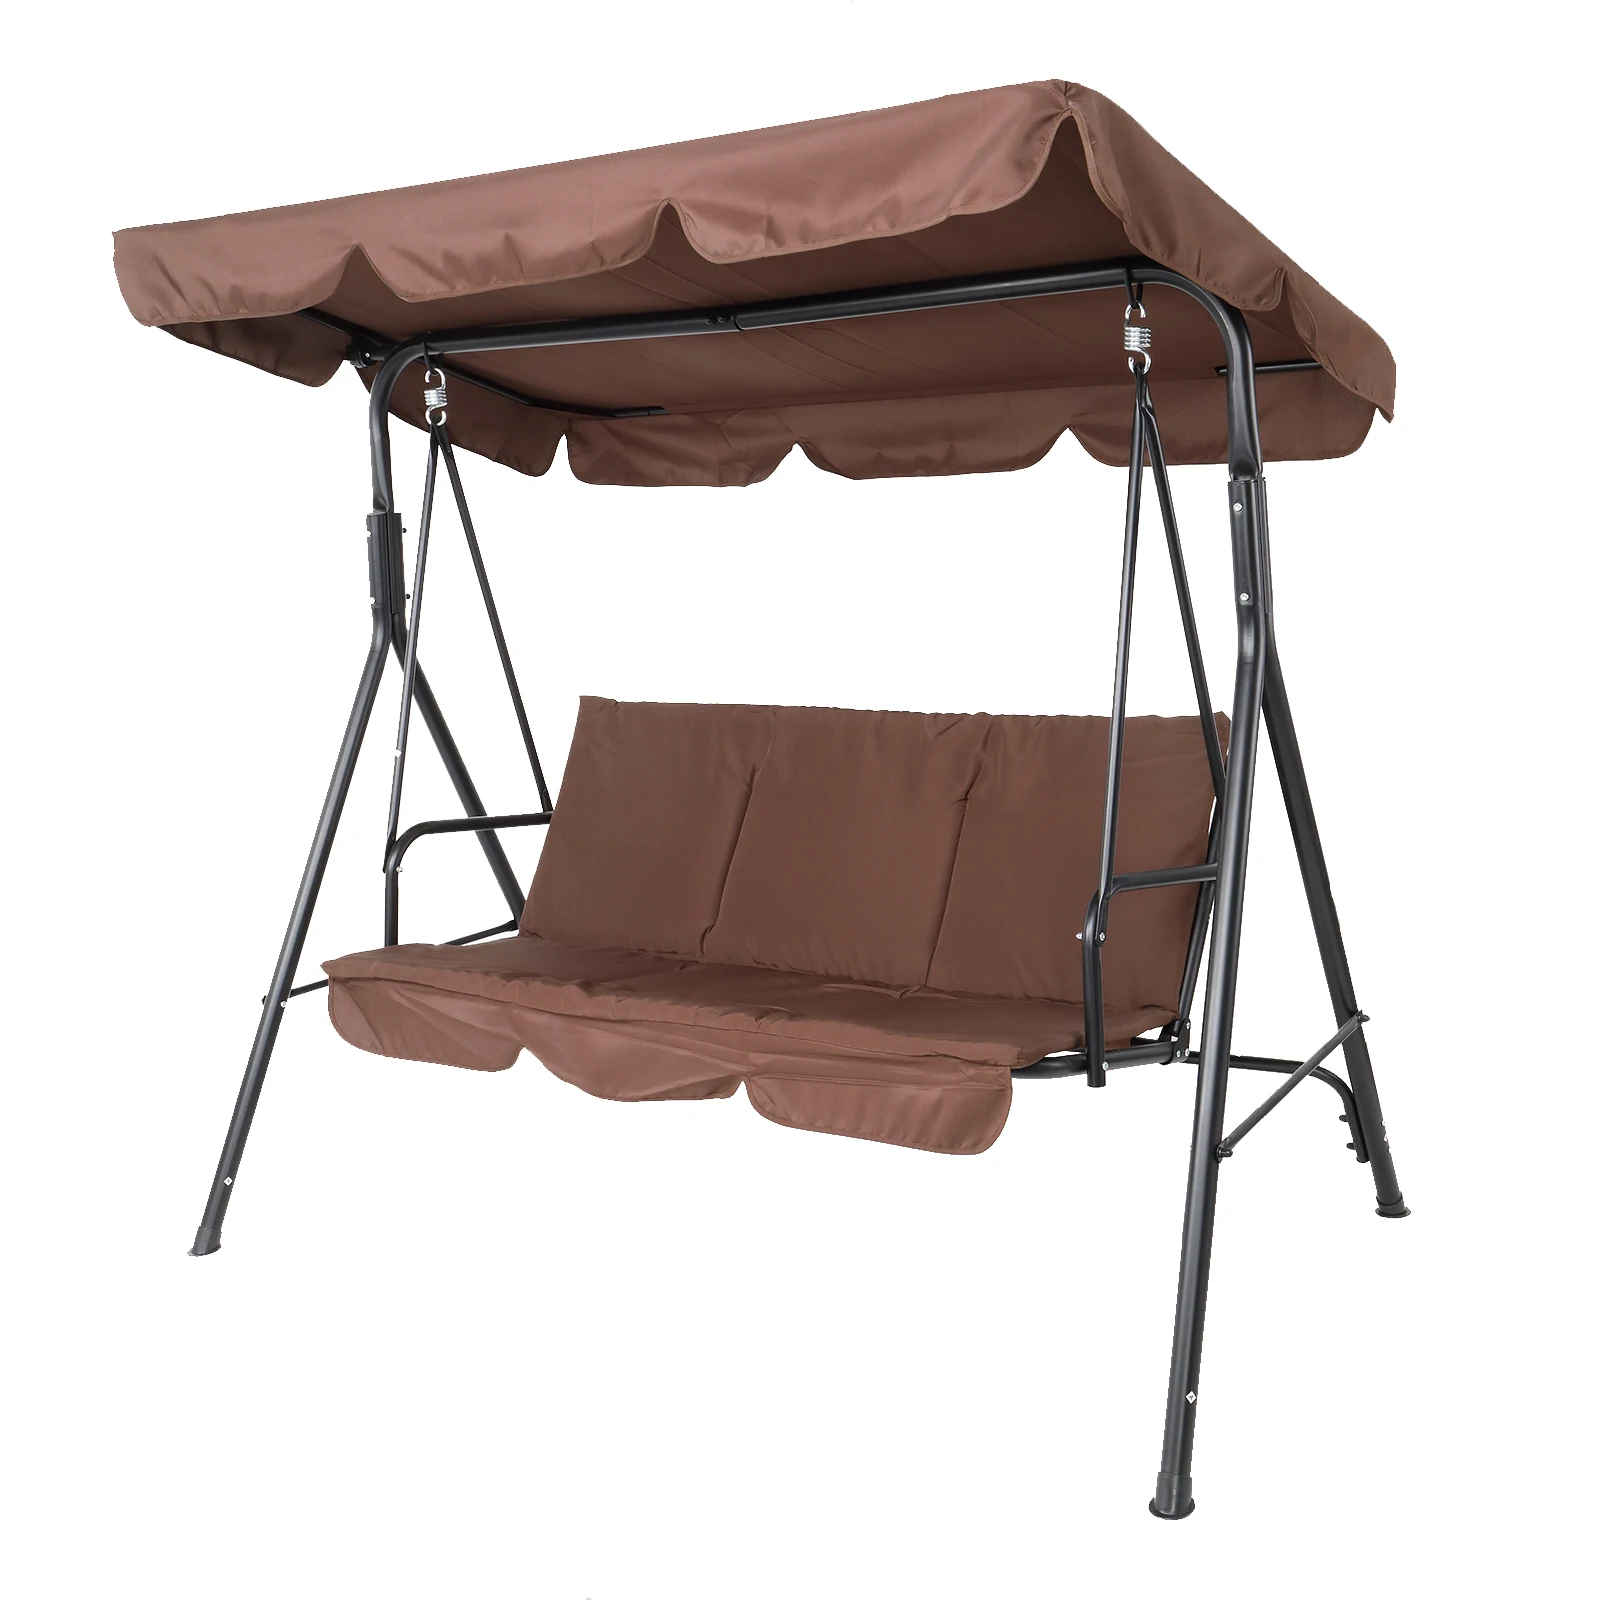 

170*110*153cm Outdoor Garden Patio Swing With Canopy and Cushion 250kg Load-Bearing Iron Swing Brown Sunshade Cover Waterproof